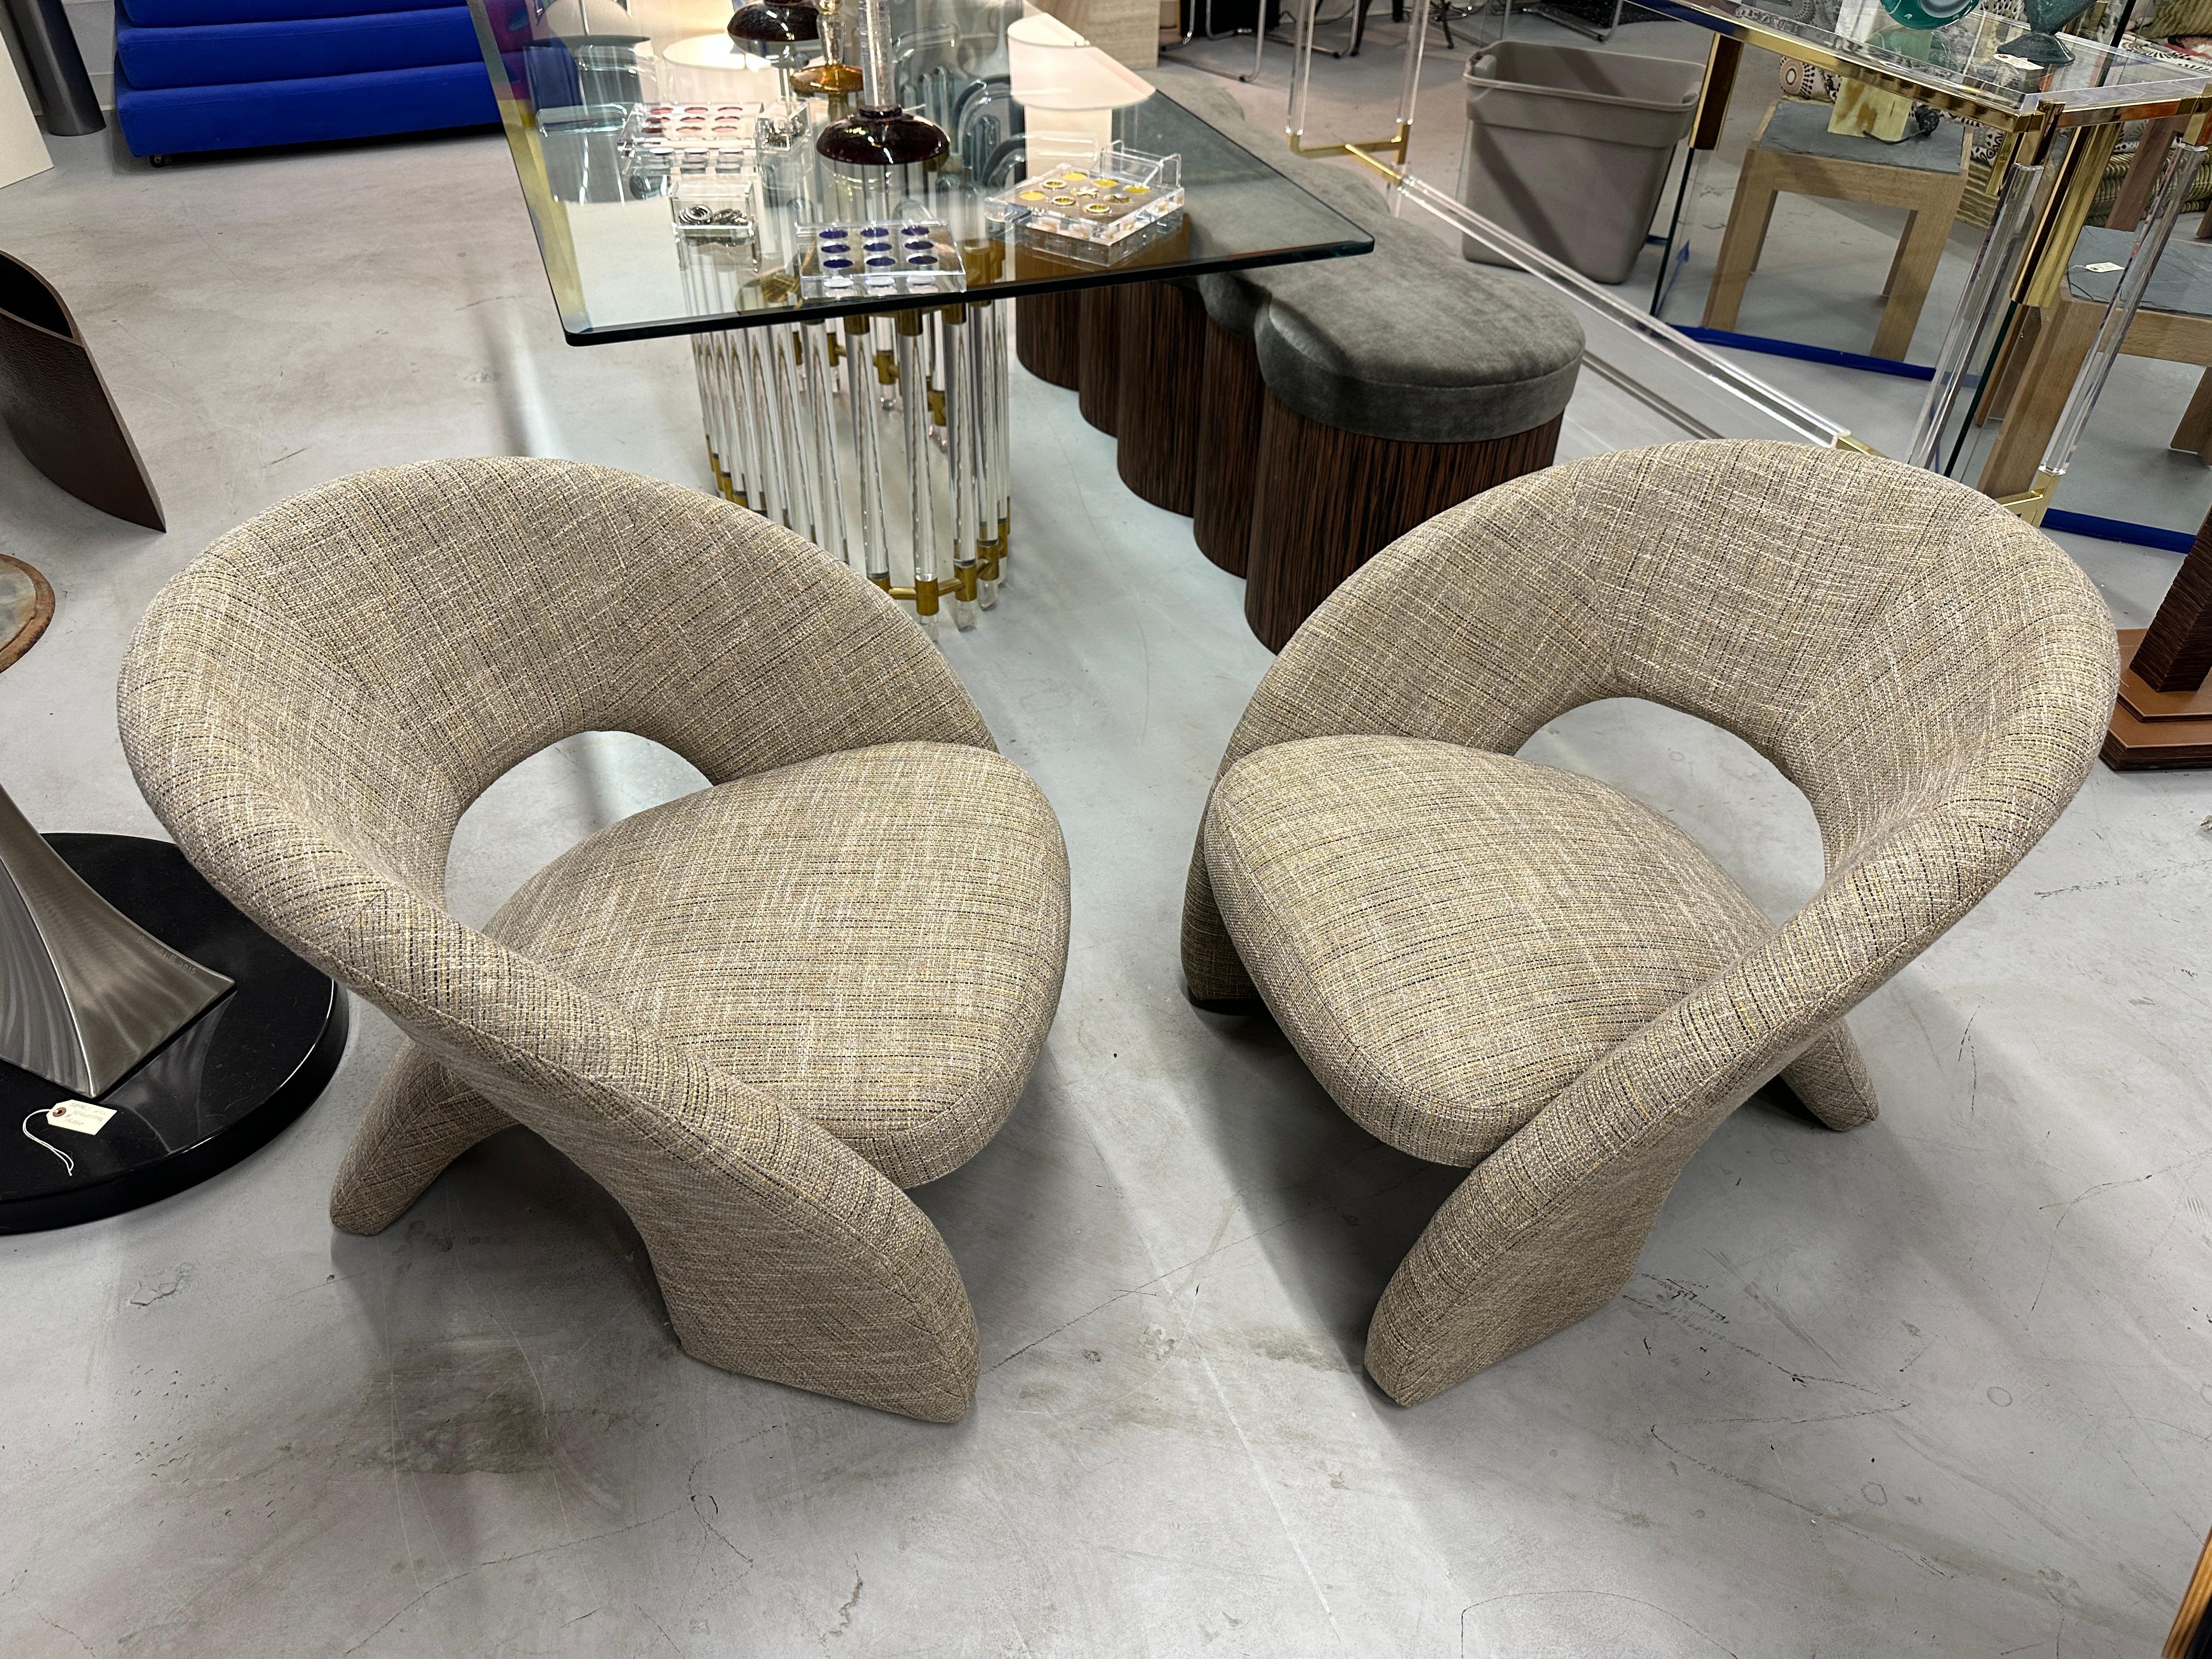 A nice pair of sculptural post modern chairs in the style of Jaymar chairs. We've had these redone and reupholstered in a Citrine Gold Tweed Chenille. They are pictured next to a Herman Miller Palisander Eames chair in our Gallery for scale.